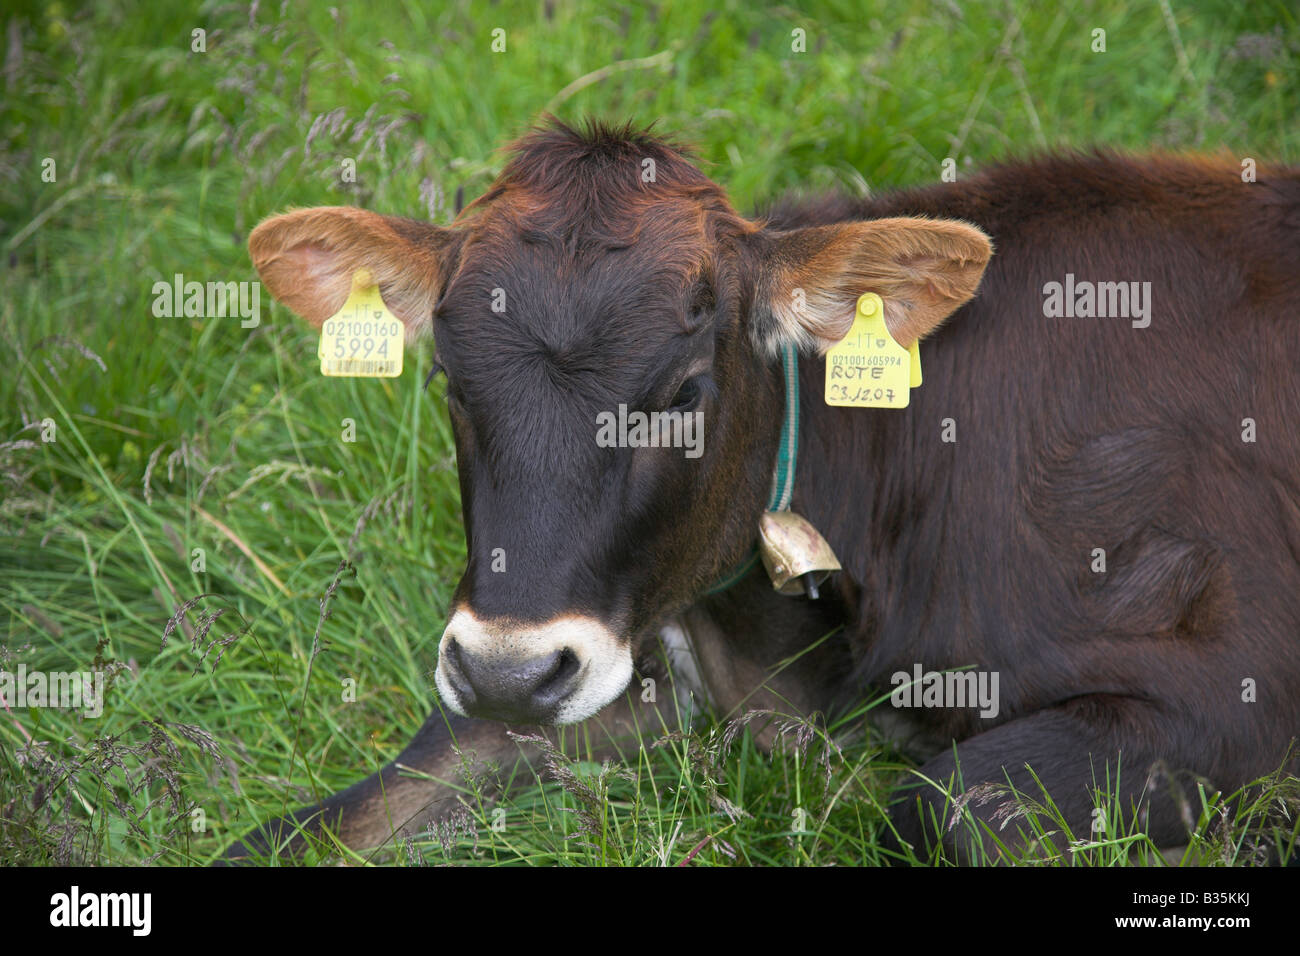 Cow with identification tags. Stock Photo